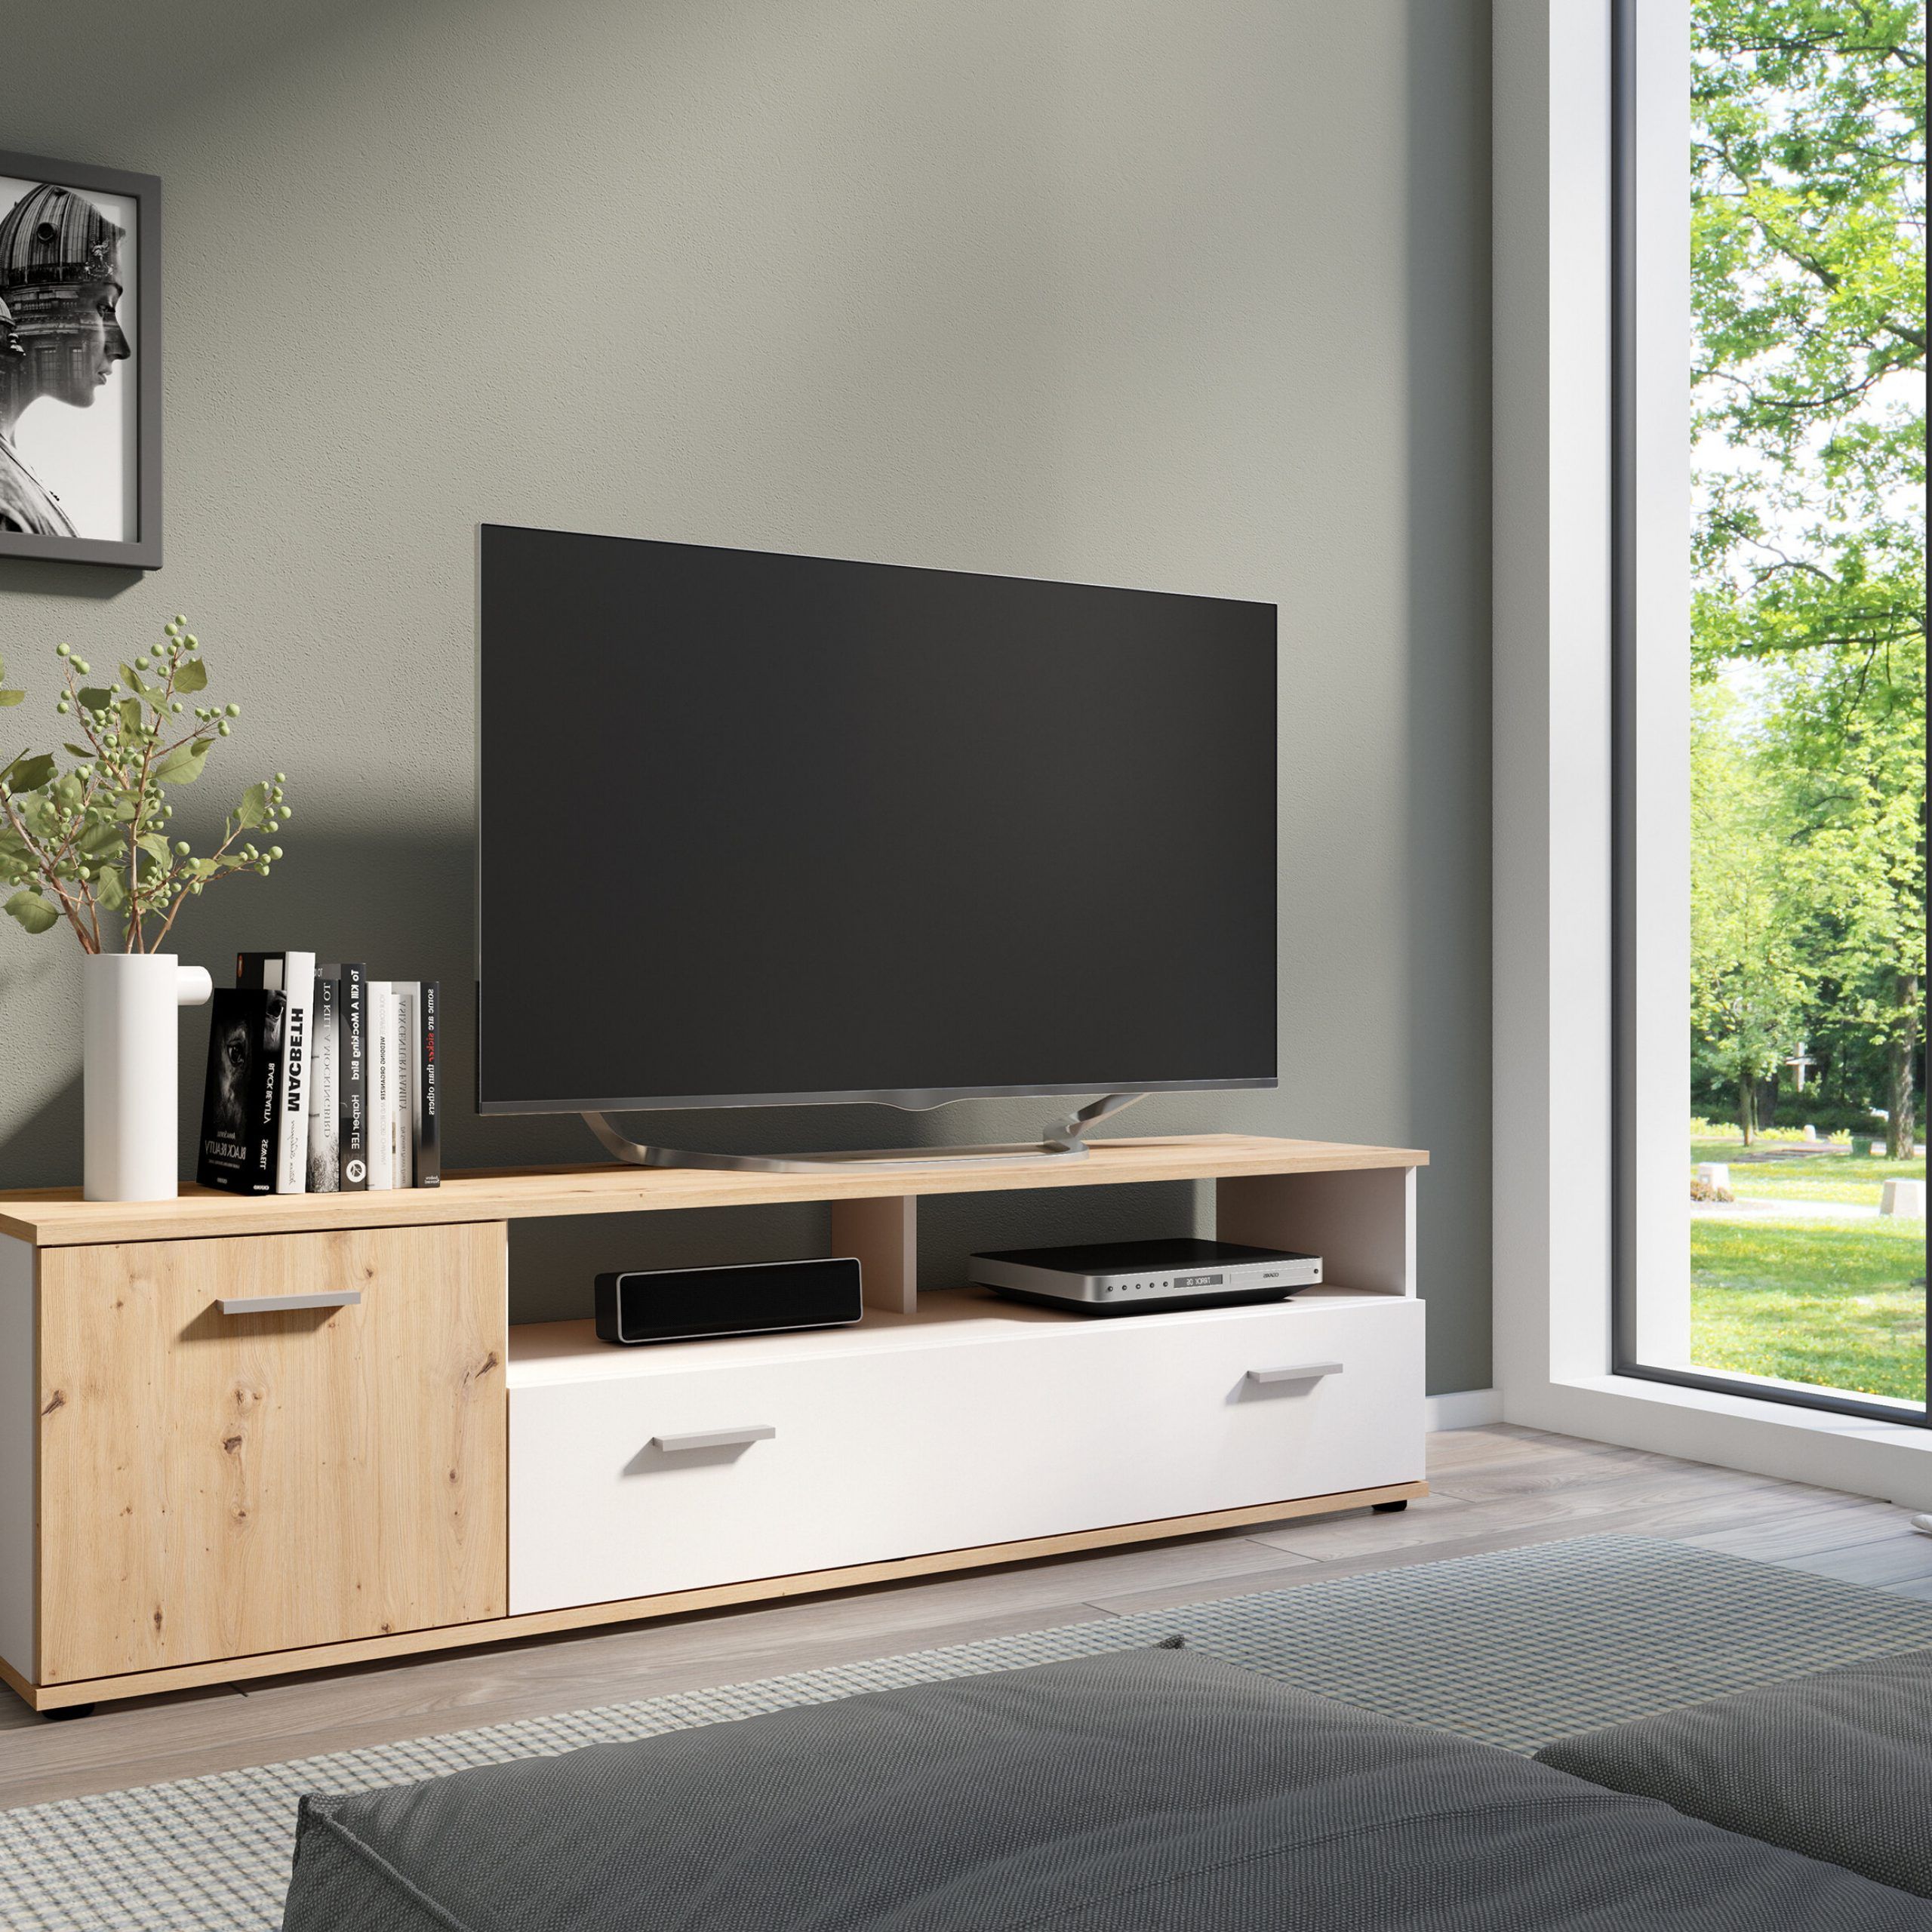 Ebern Designs Deshaunta Tv Stand For Tvs Up To 65" (View 10 of 10)